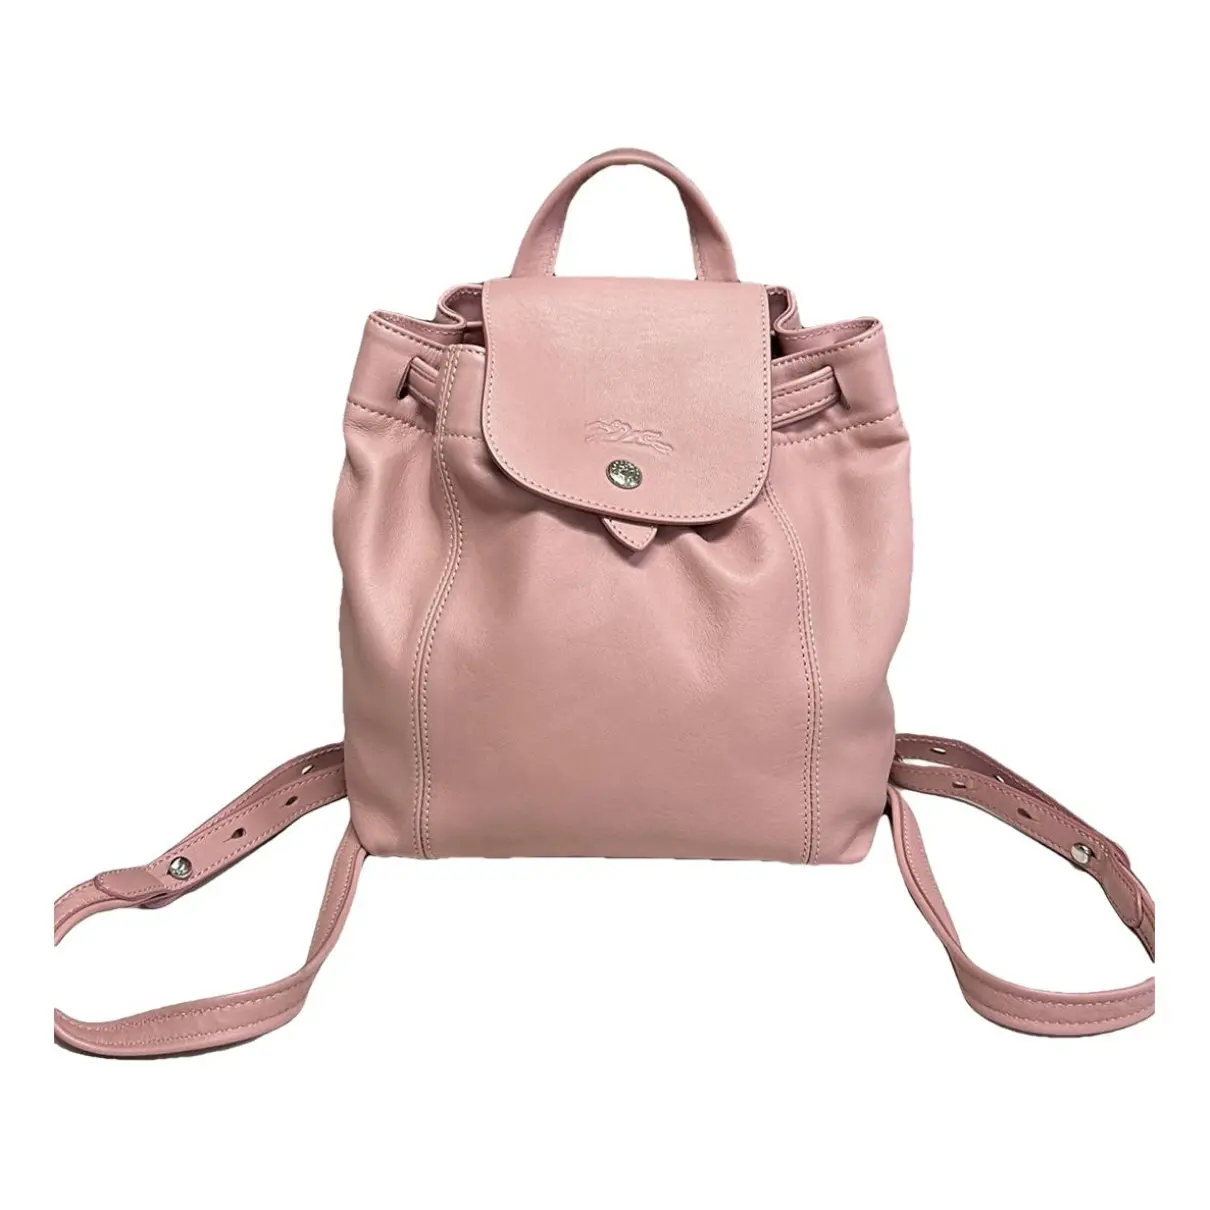 Pliage leather backpack